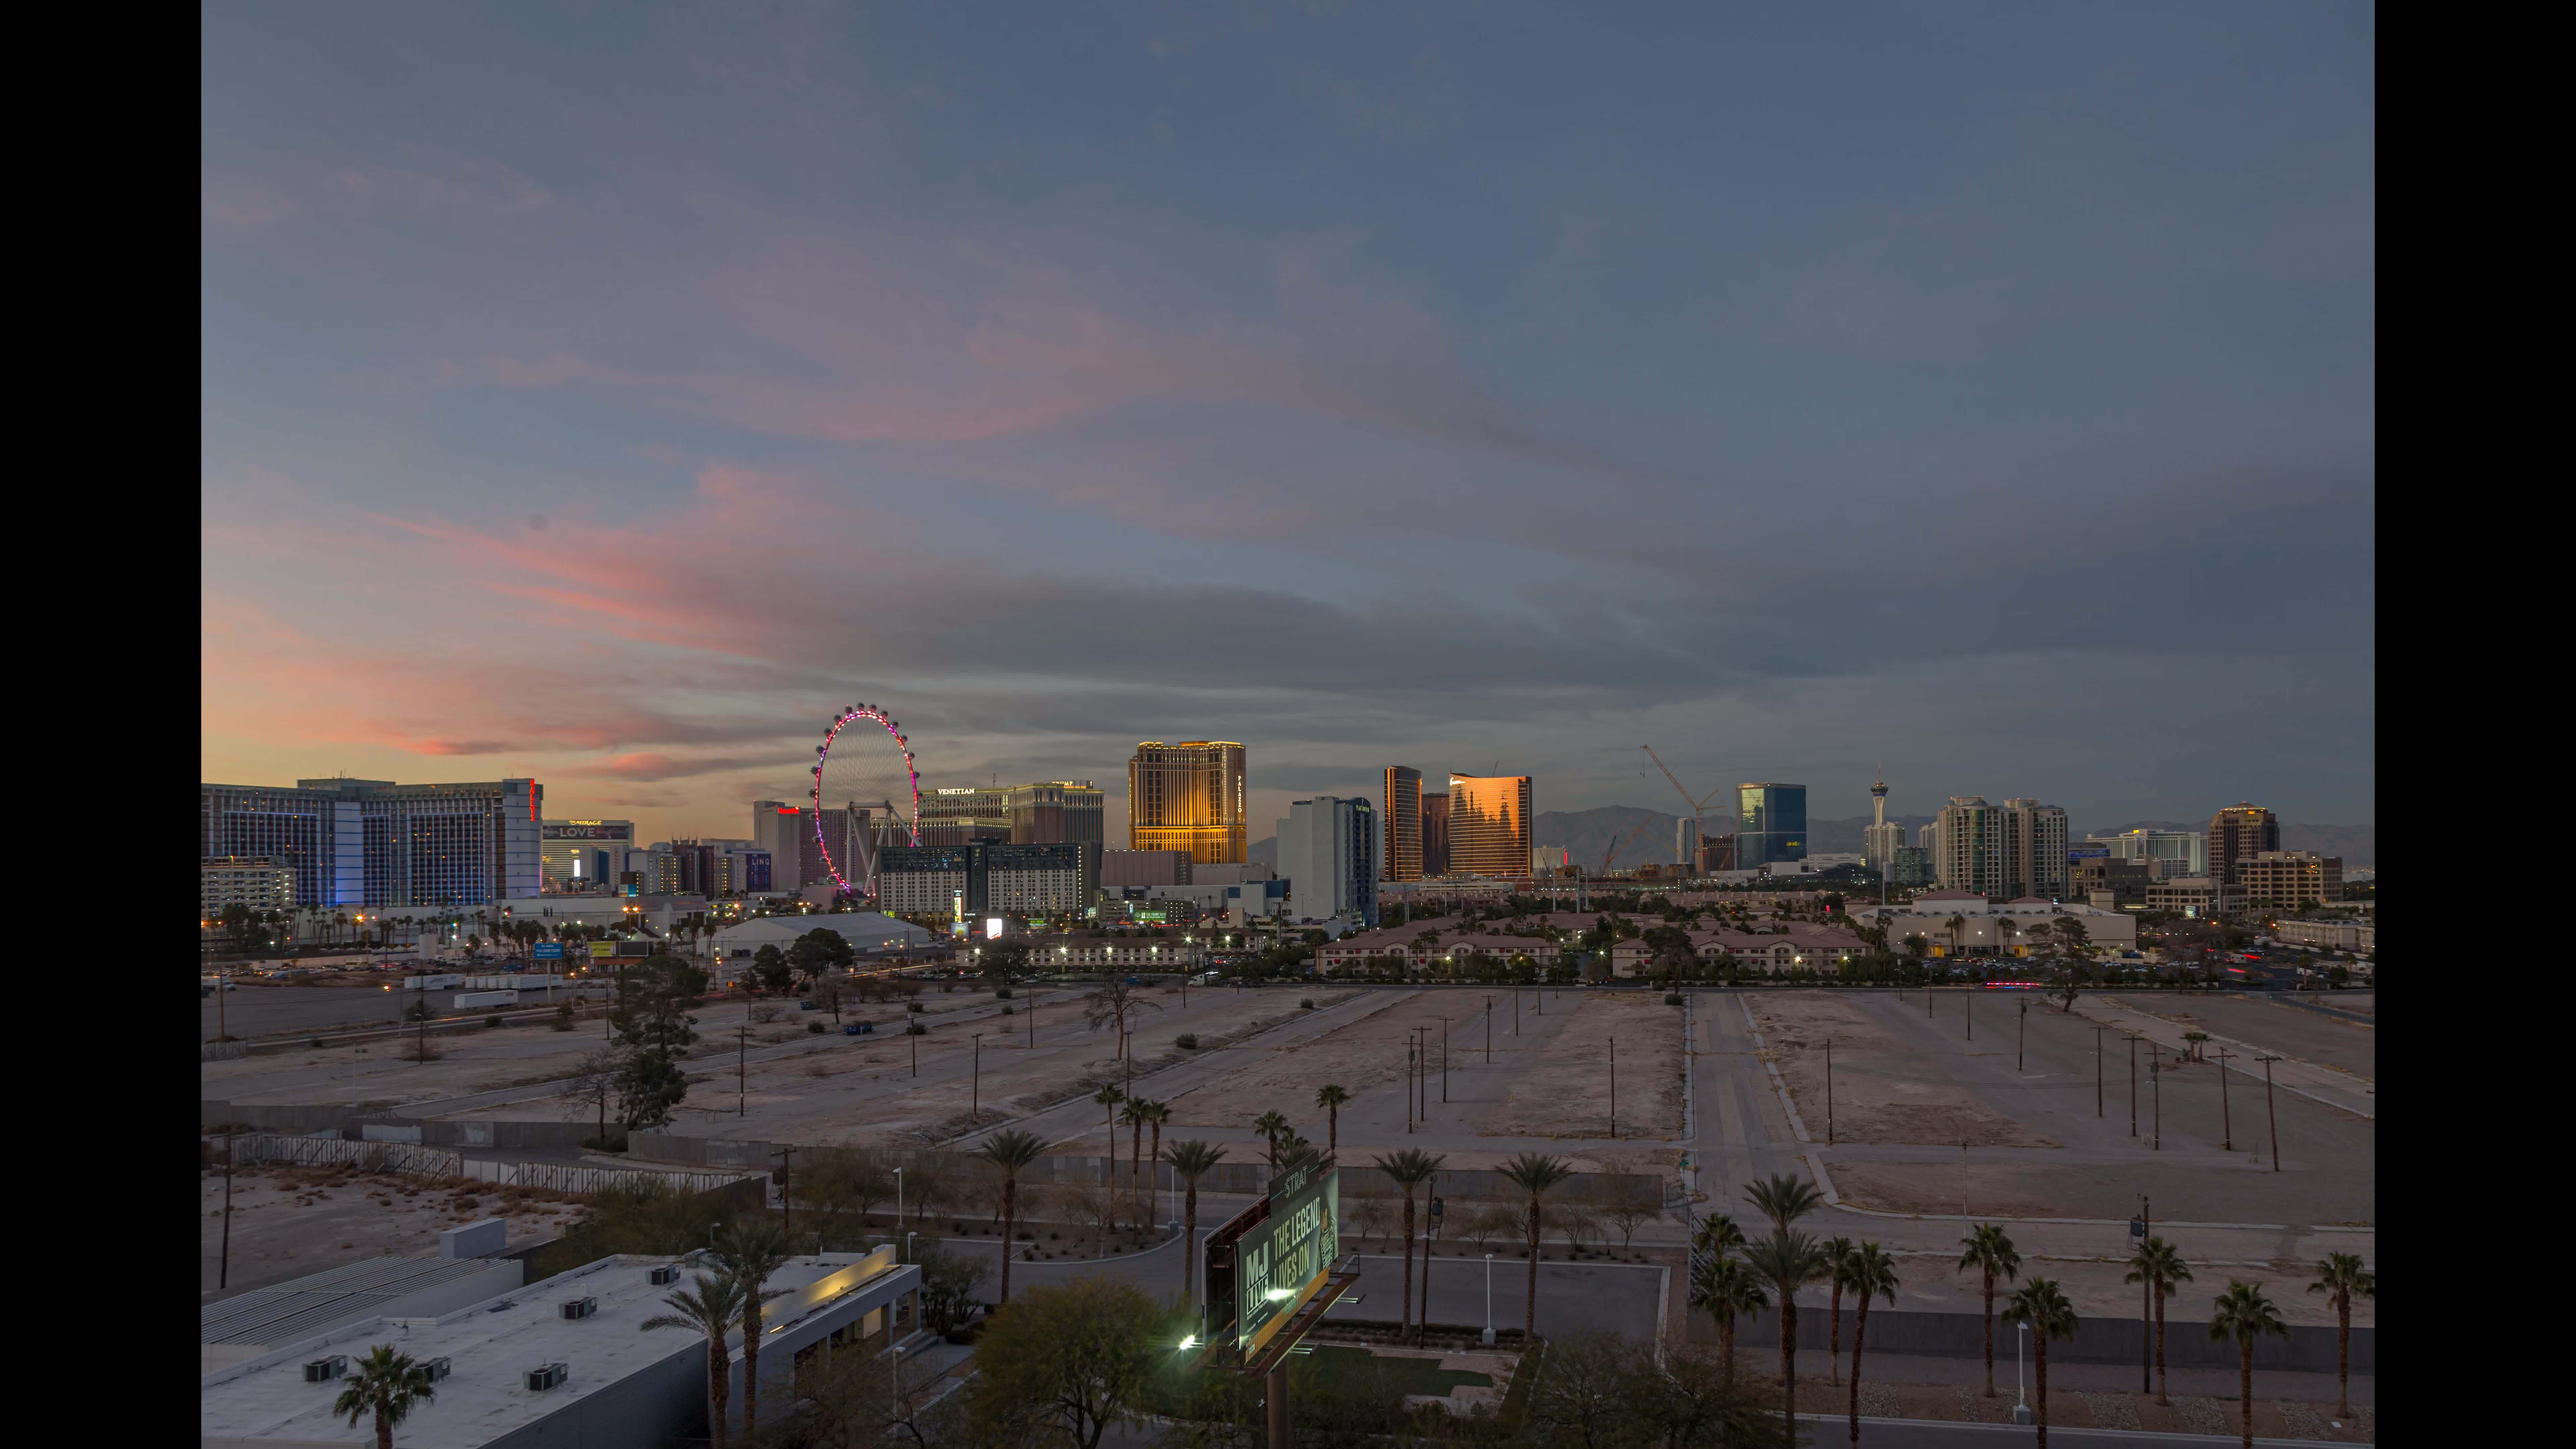 Time lapse video of sunset over Las Vegas 22899249 Stock at Vecteezy